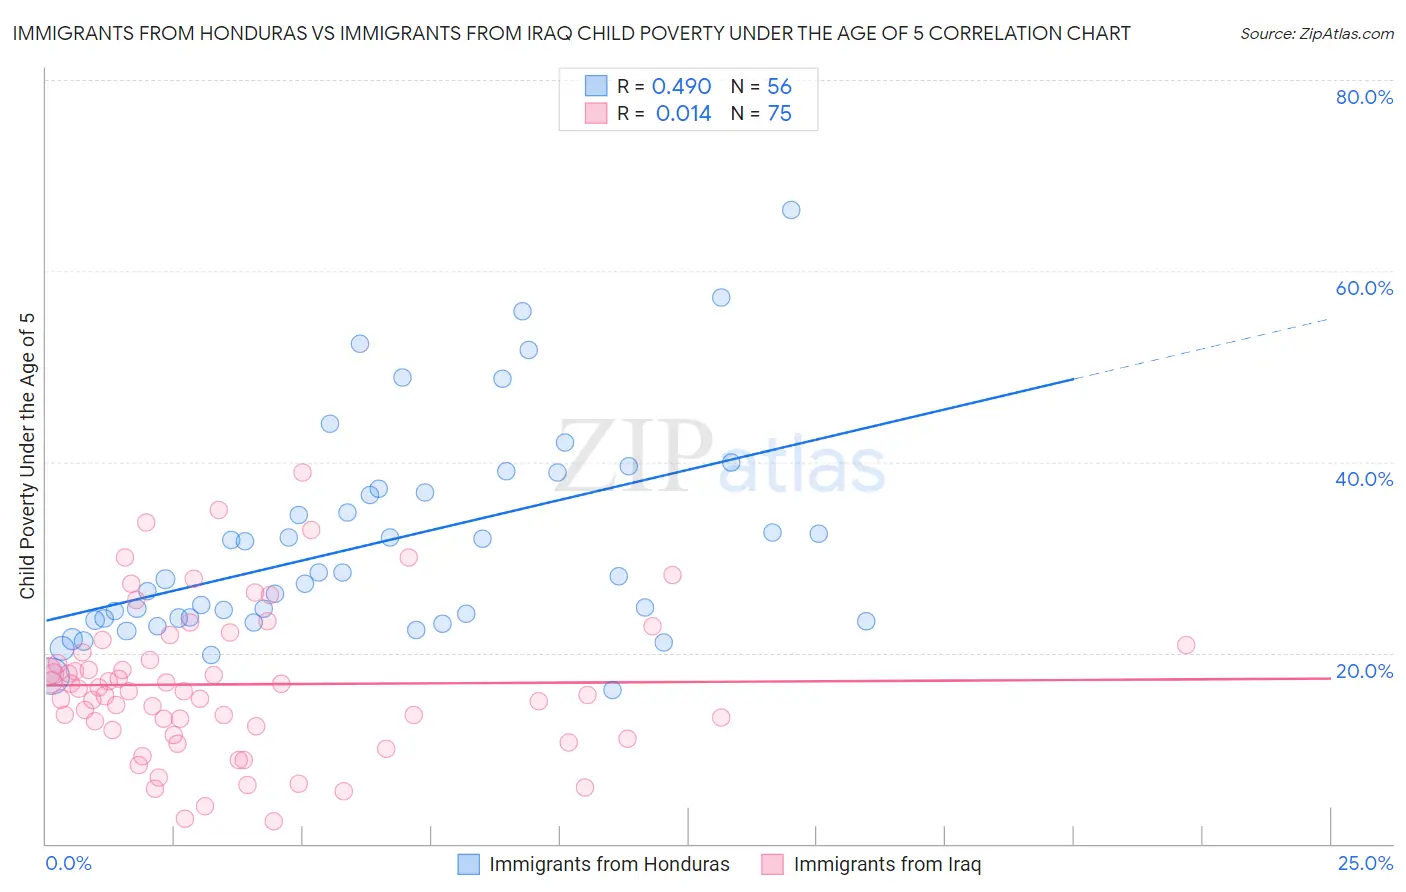 Immigrants from Honduras vs Immigrants from Iraq Child Poverty Under the Age of 5